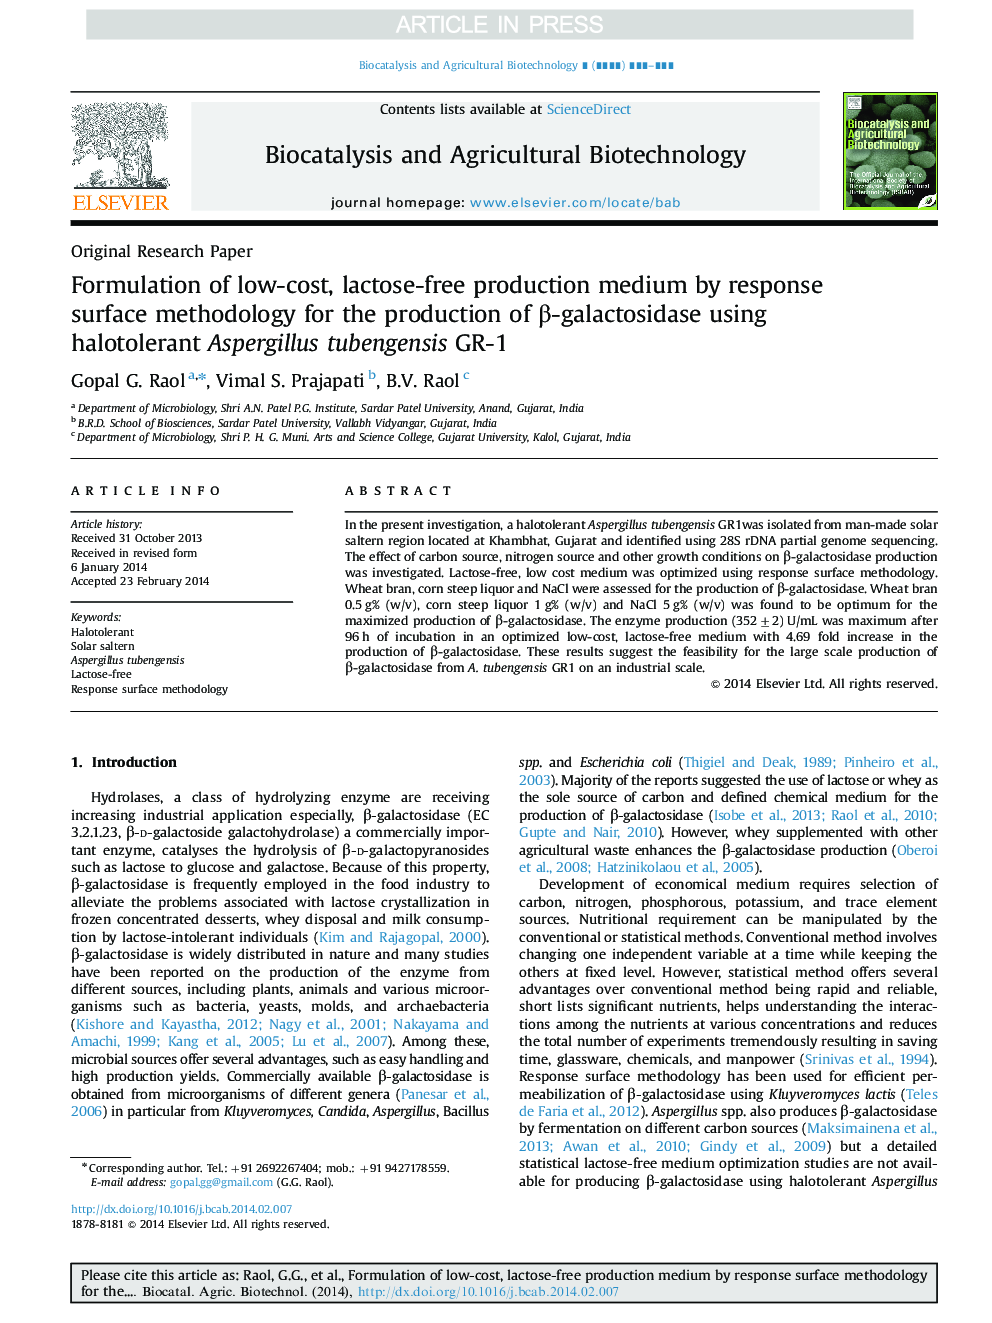 Formulation of low-cost, lactose-free production medium by response surface methodology for the production of Î²-galactosidase using halotolerant Aspergillus tubengensis GR-1